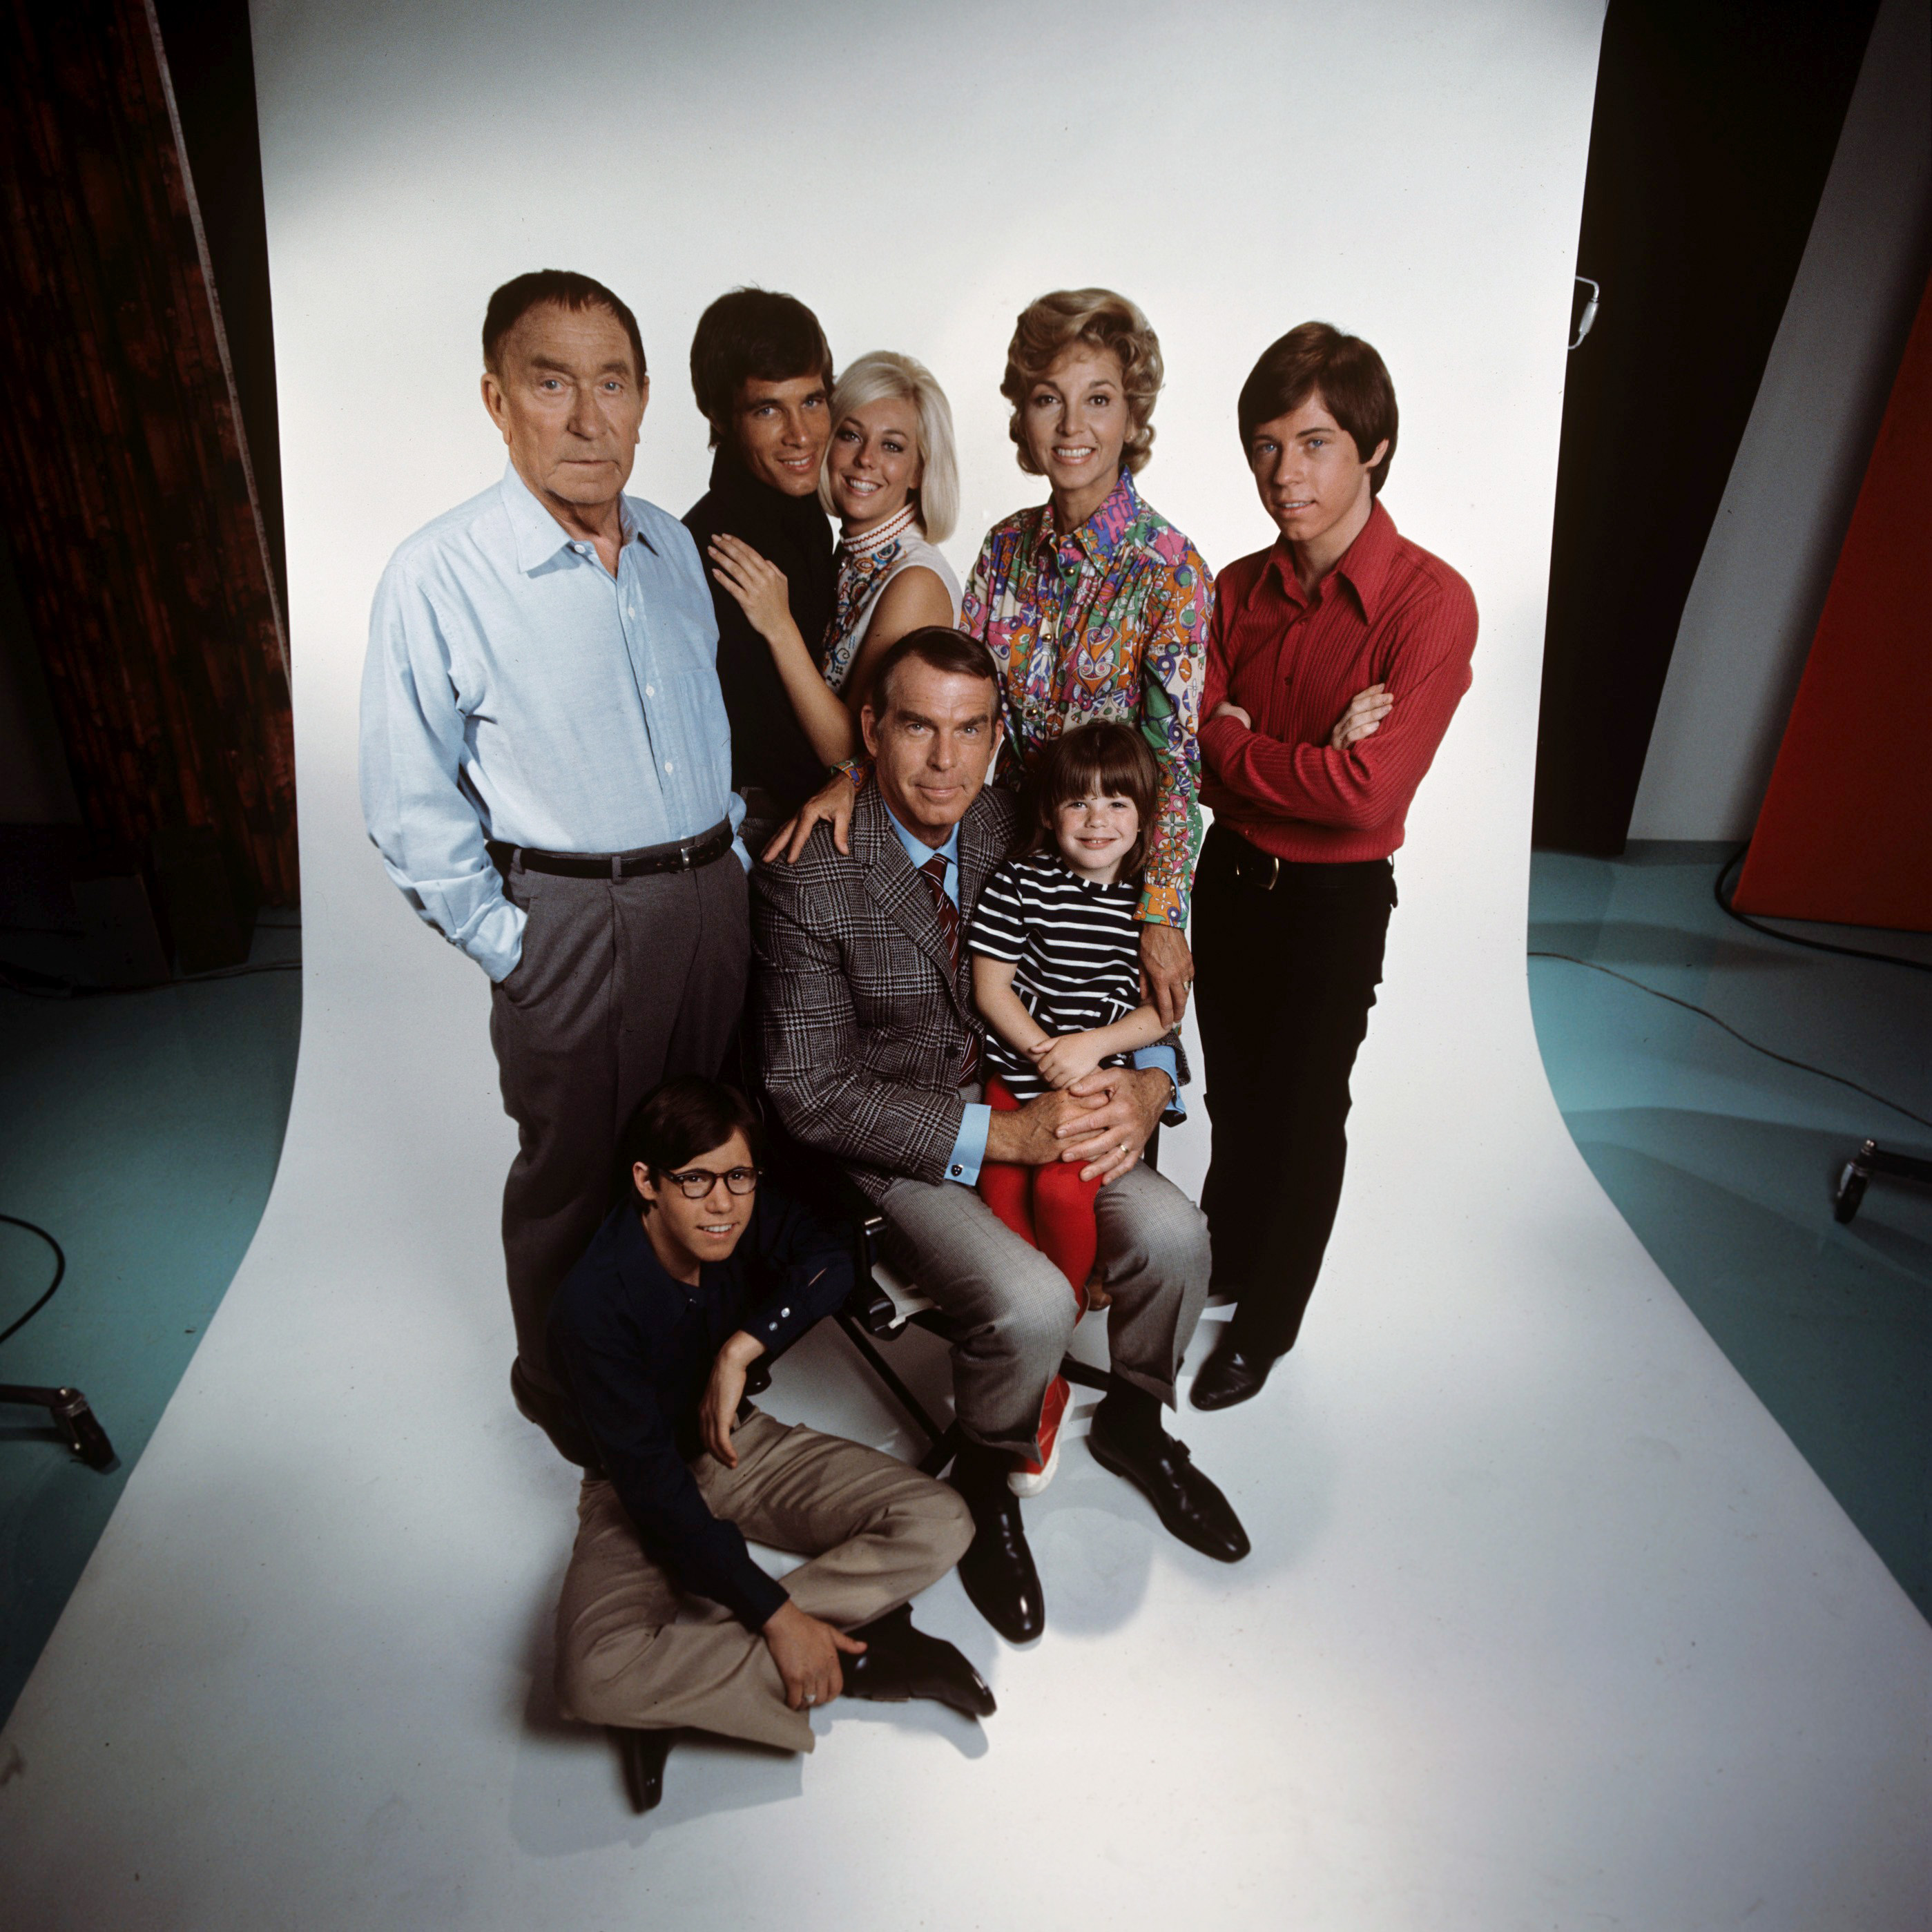 William Demarest, Barry Livingston, Don Grady, Tina Cole, Fred MacMurray, Dawn Lyn, Beverly Garland and Stanley Livingston on "My Three Sons" | Source: Getty Images